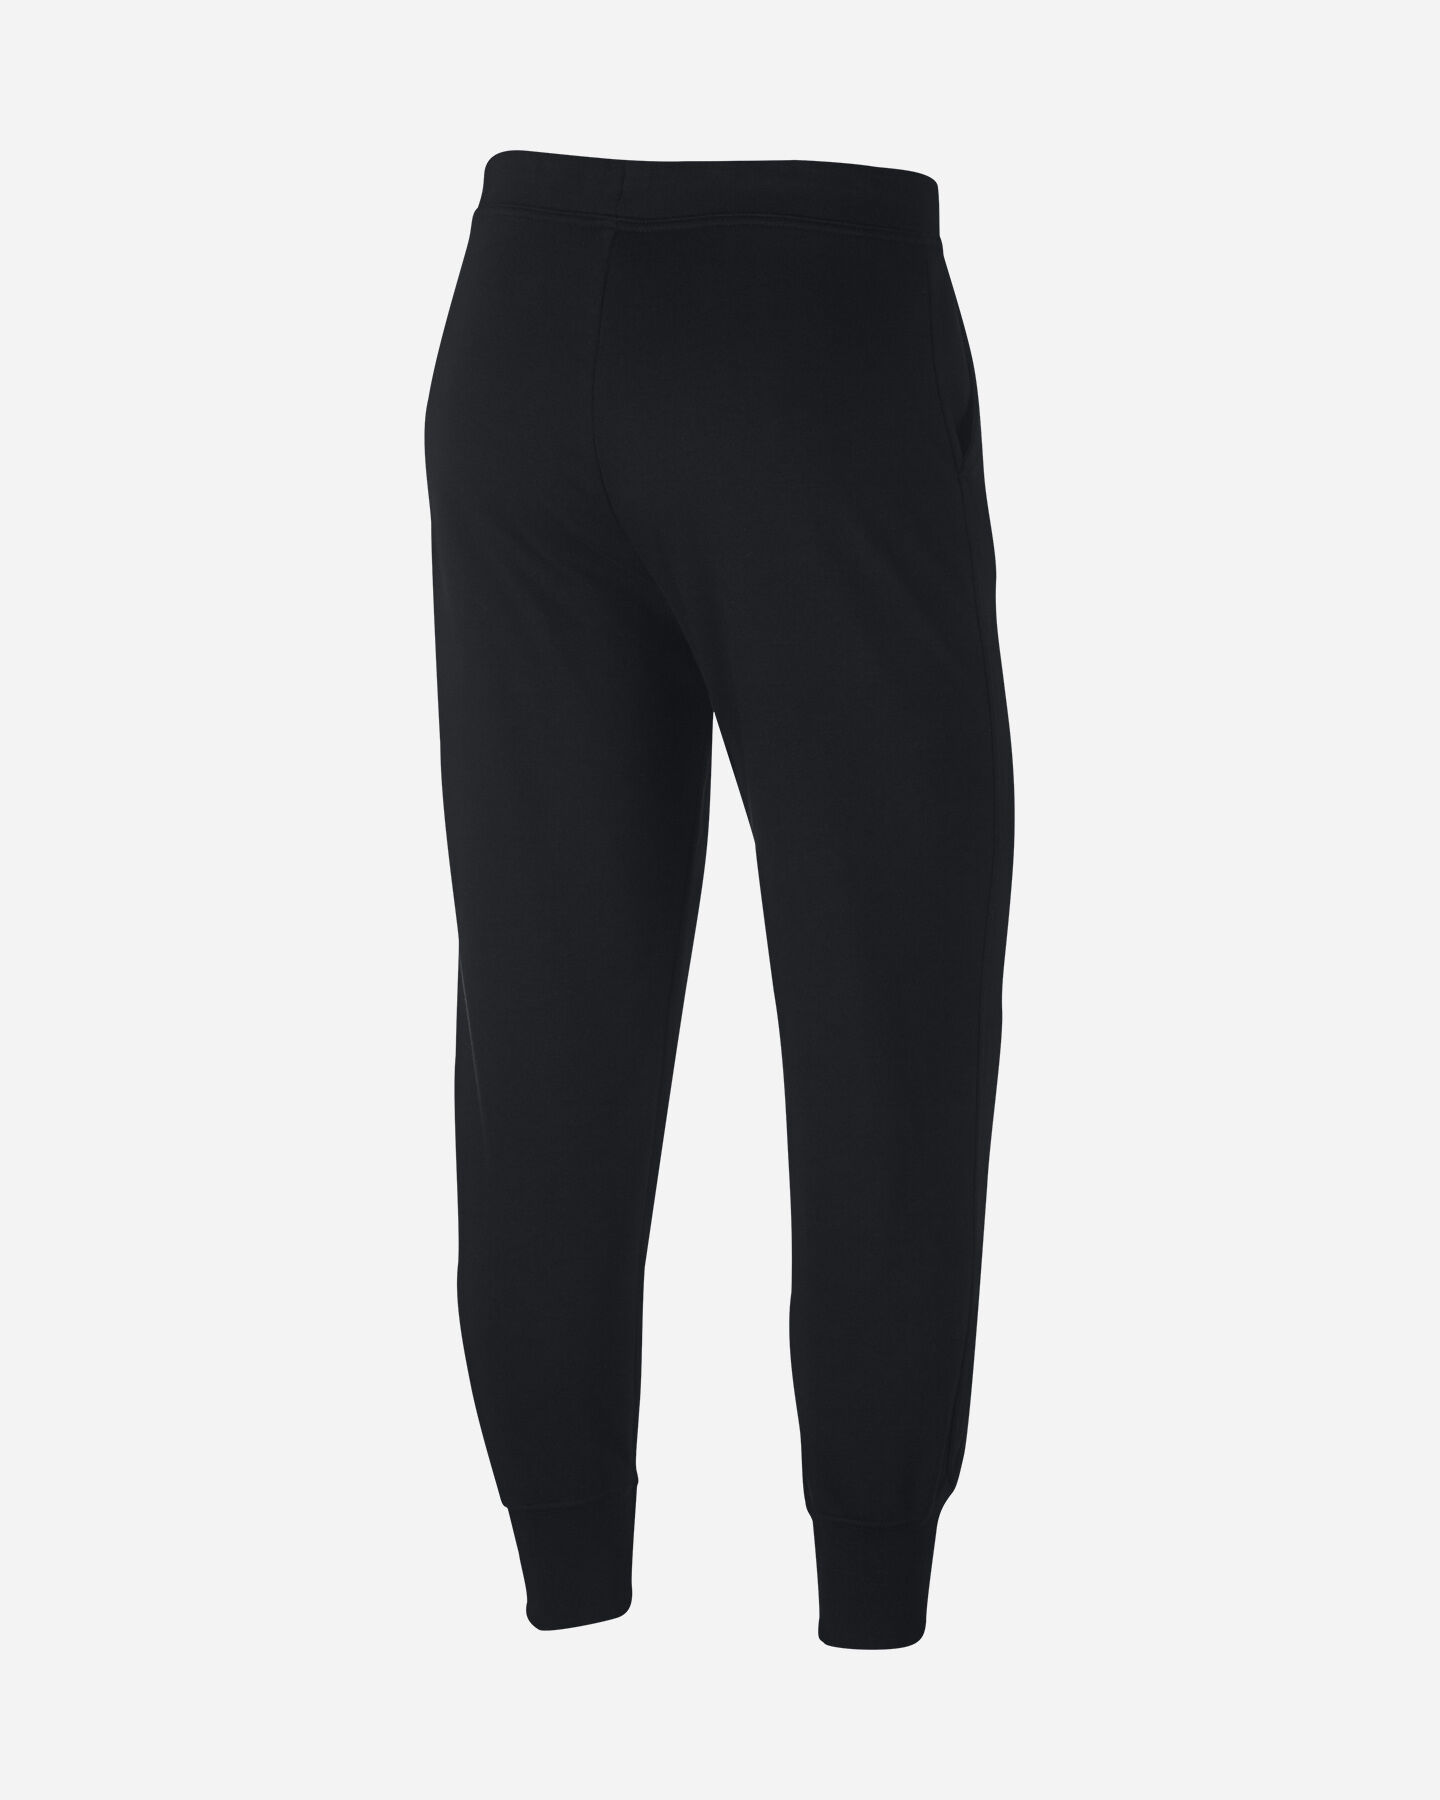  Pantalone training NIKE DRY GET FIT W S5268717|010|XS scatto 1